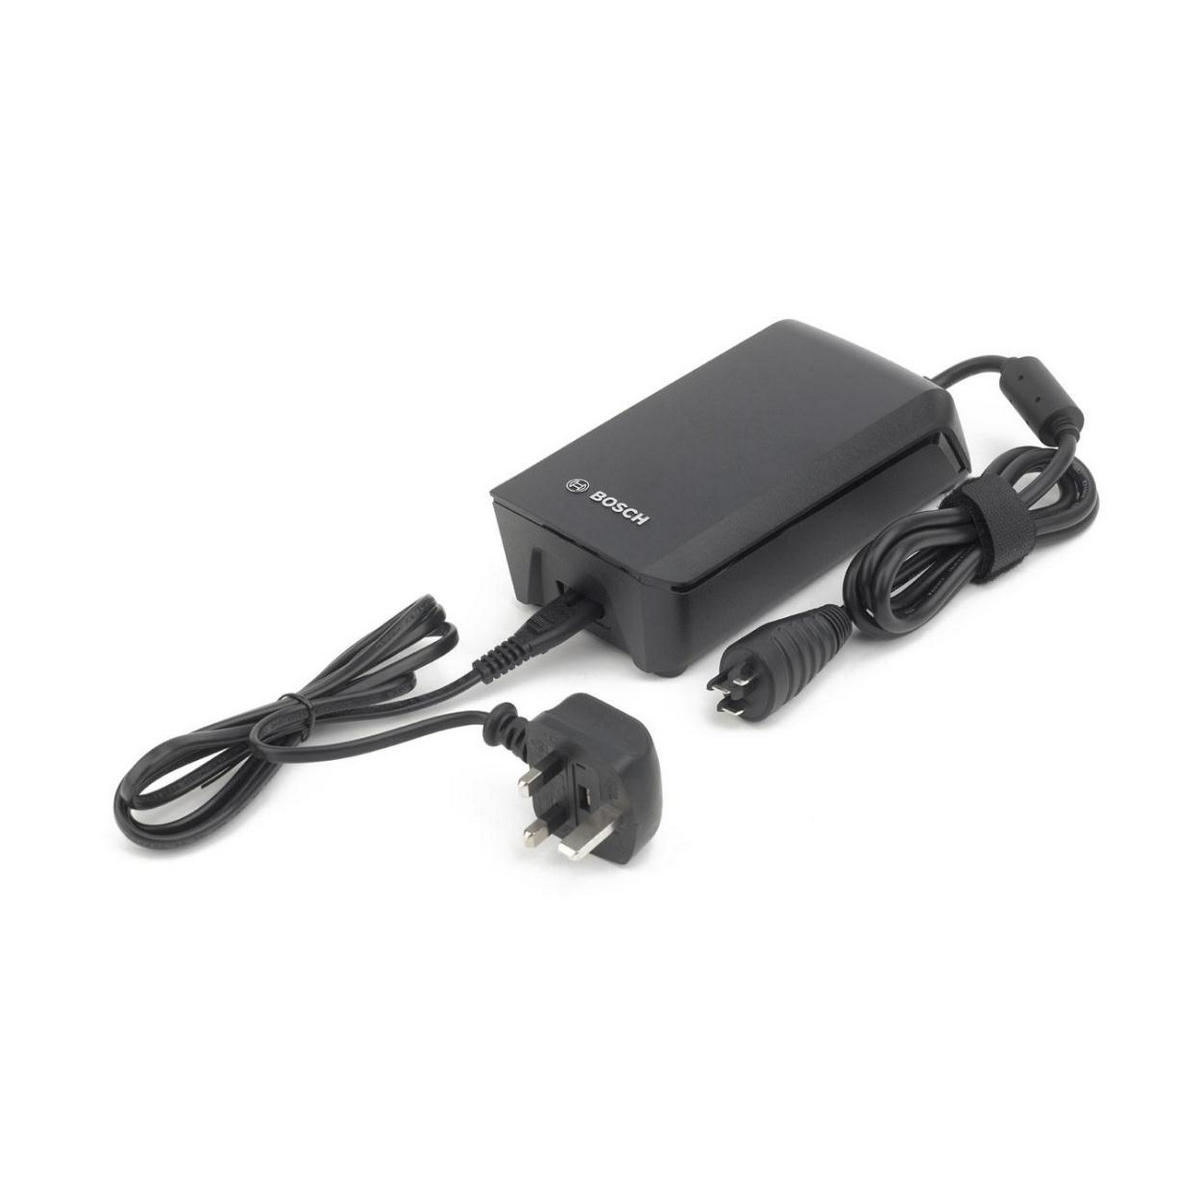 battery charger 4a active performance uk cable plug